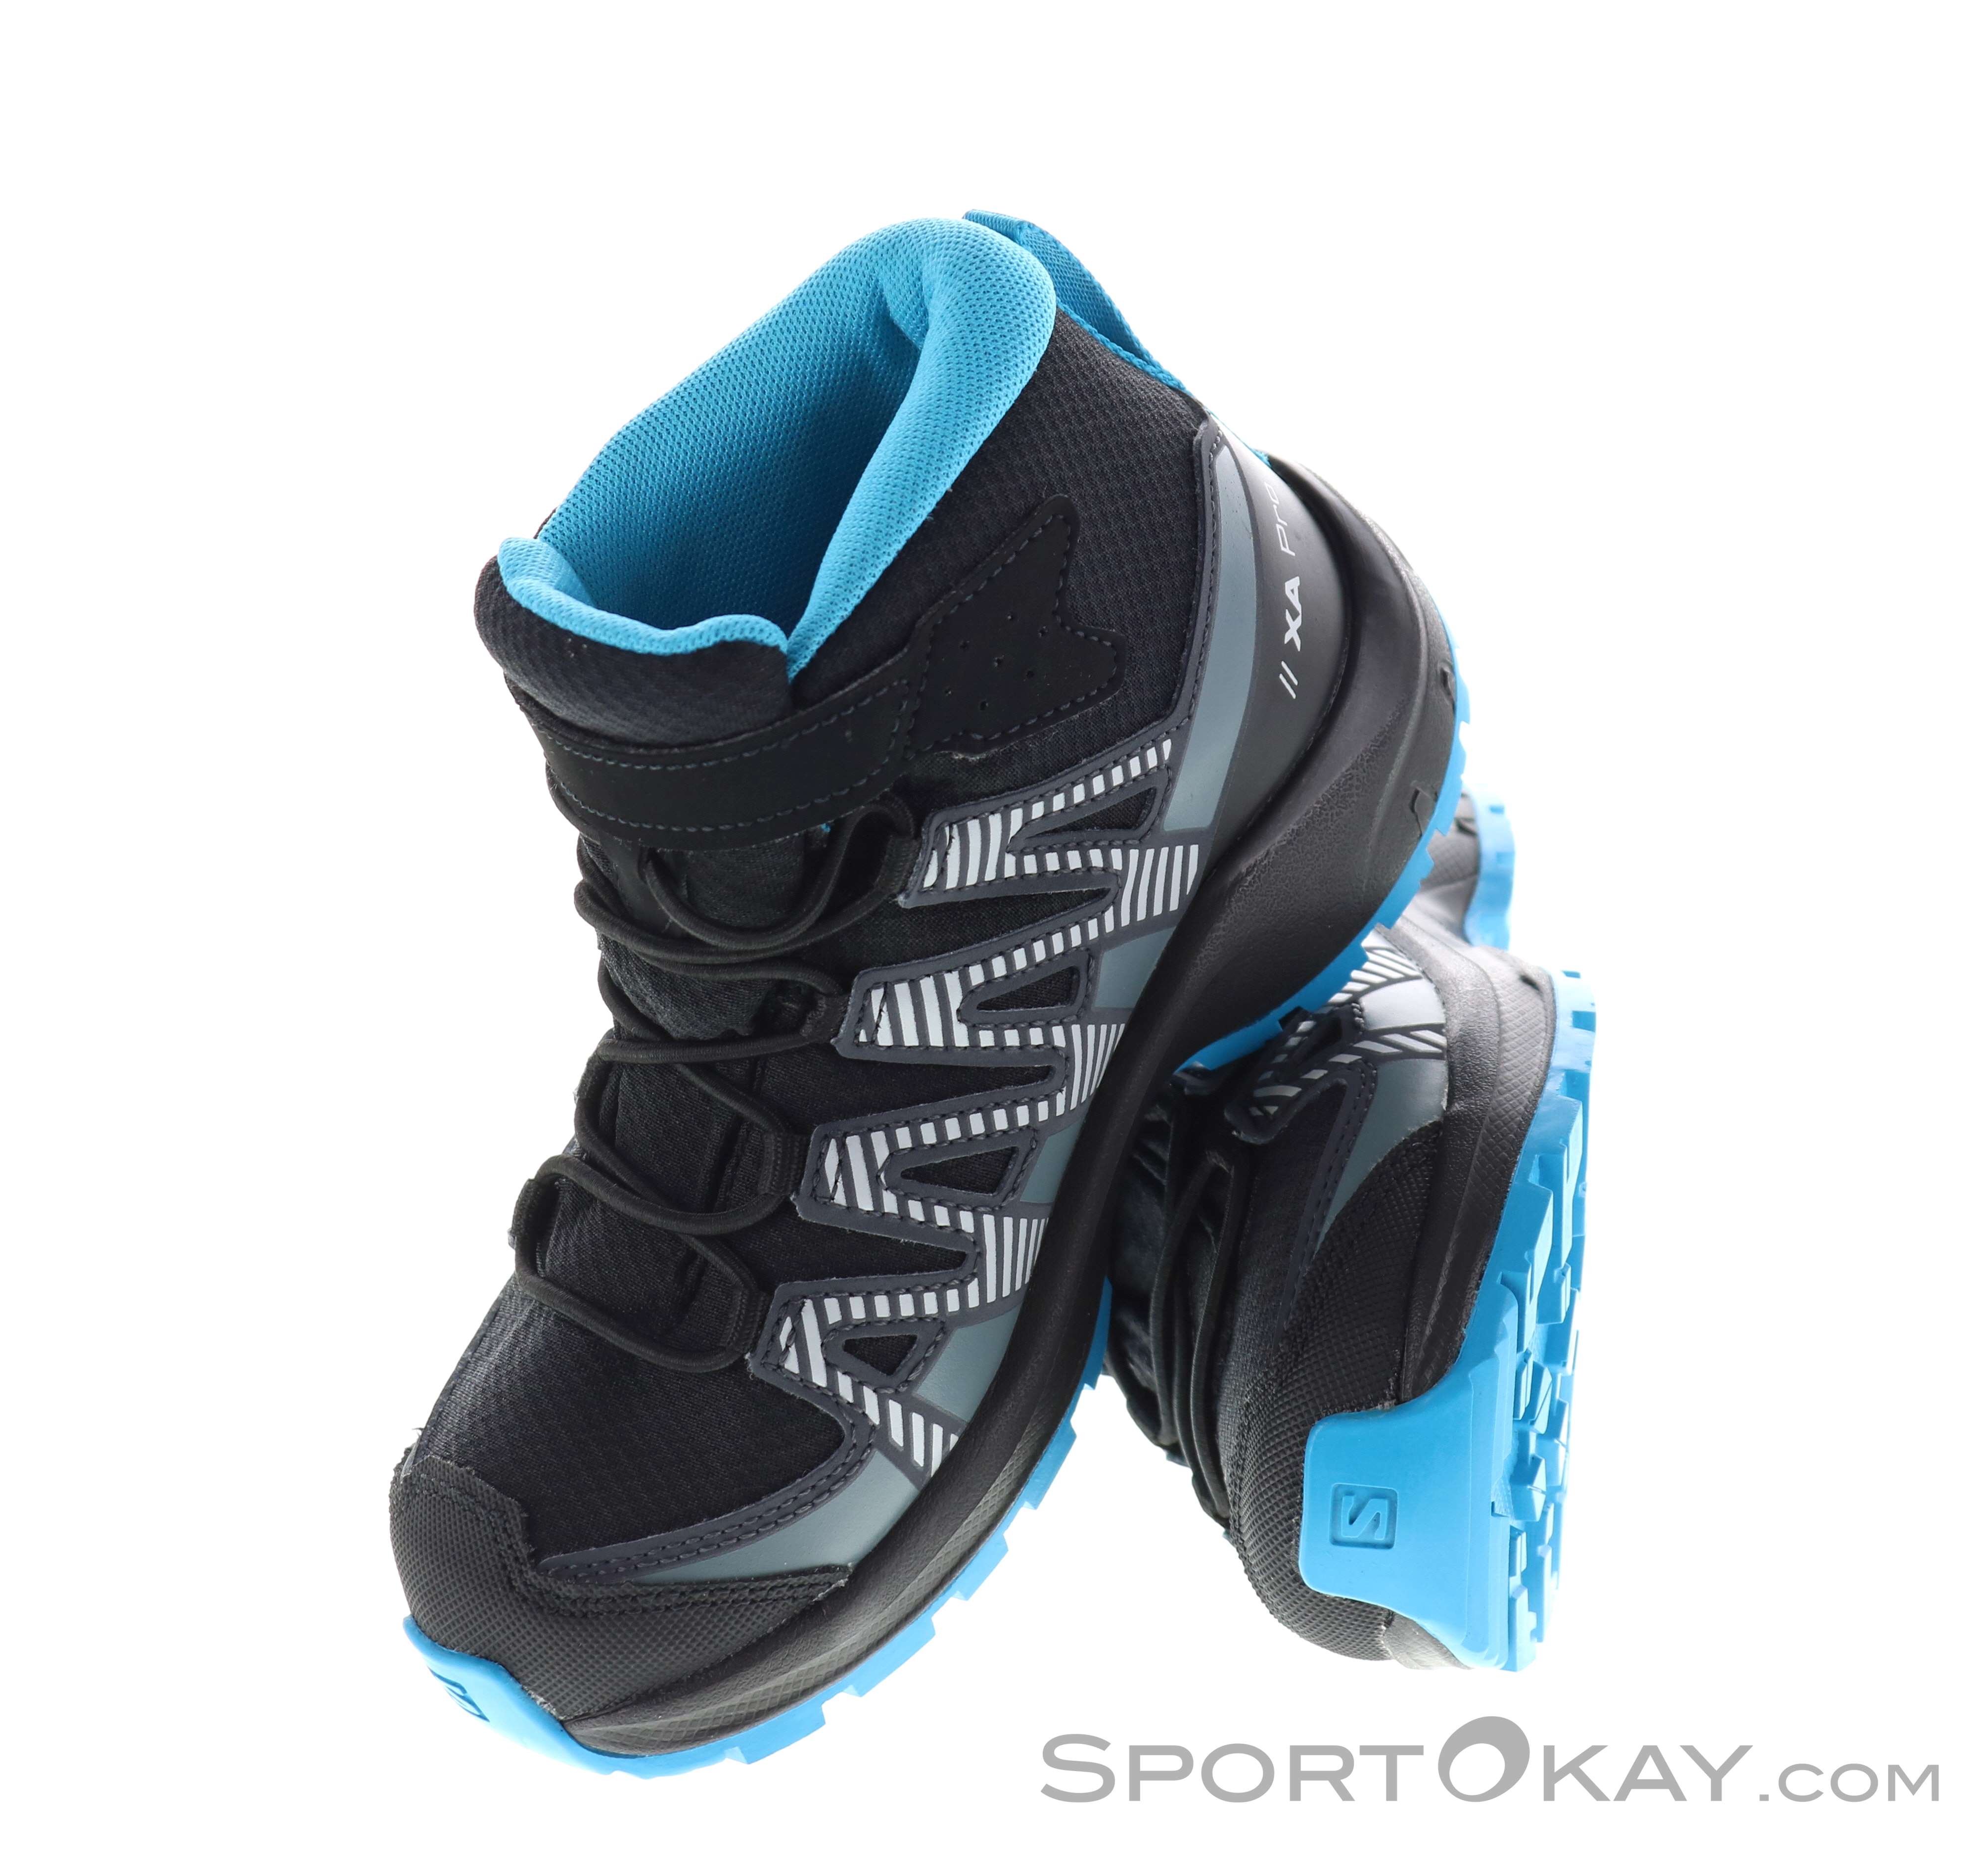 God Weave Hectares Salomon XA Pro 3D Mid CSWP Kids Outdoor Shoes - Hiking Boots - Shoes &  Poles - Outdoor - All